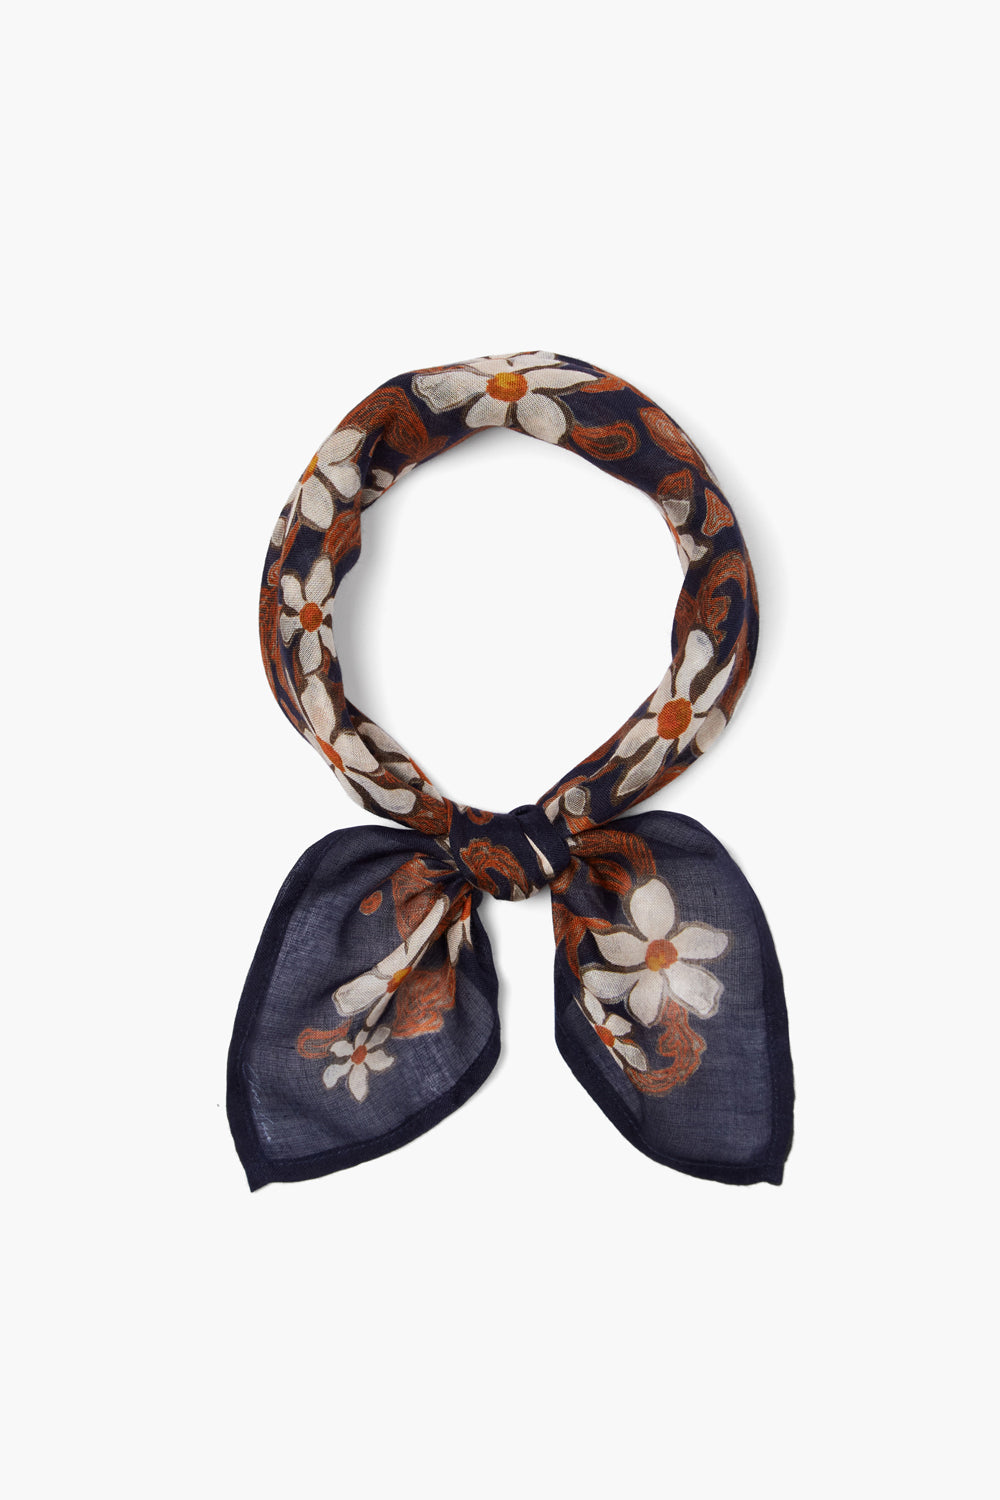 ABSTRACT FLORAL BANDANA-DARK SAPPHIRE - Kingfisher Road - Online Boutique